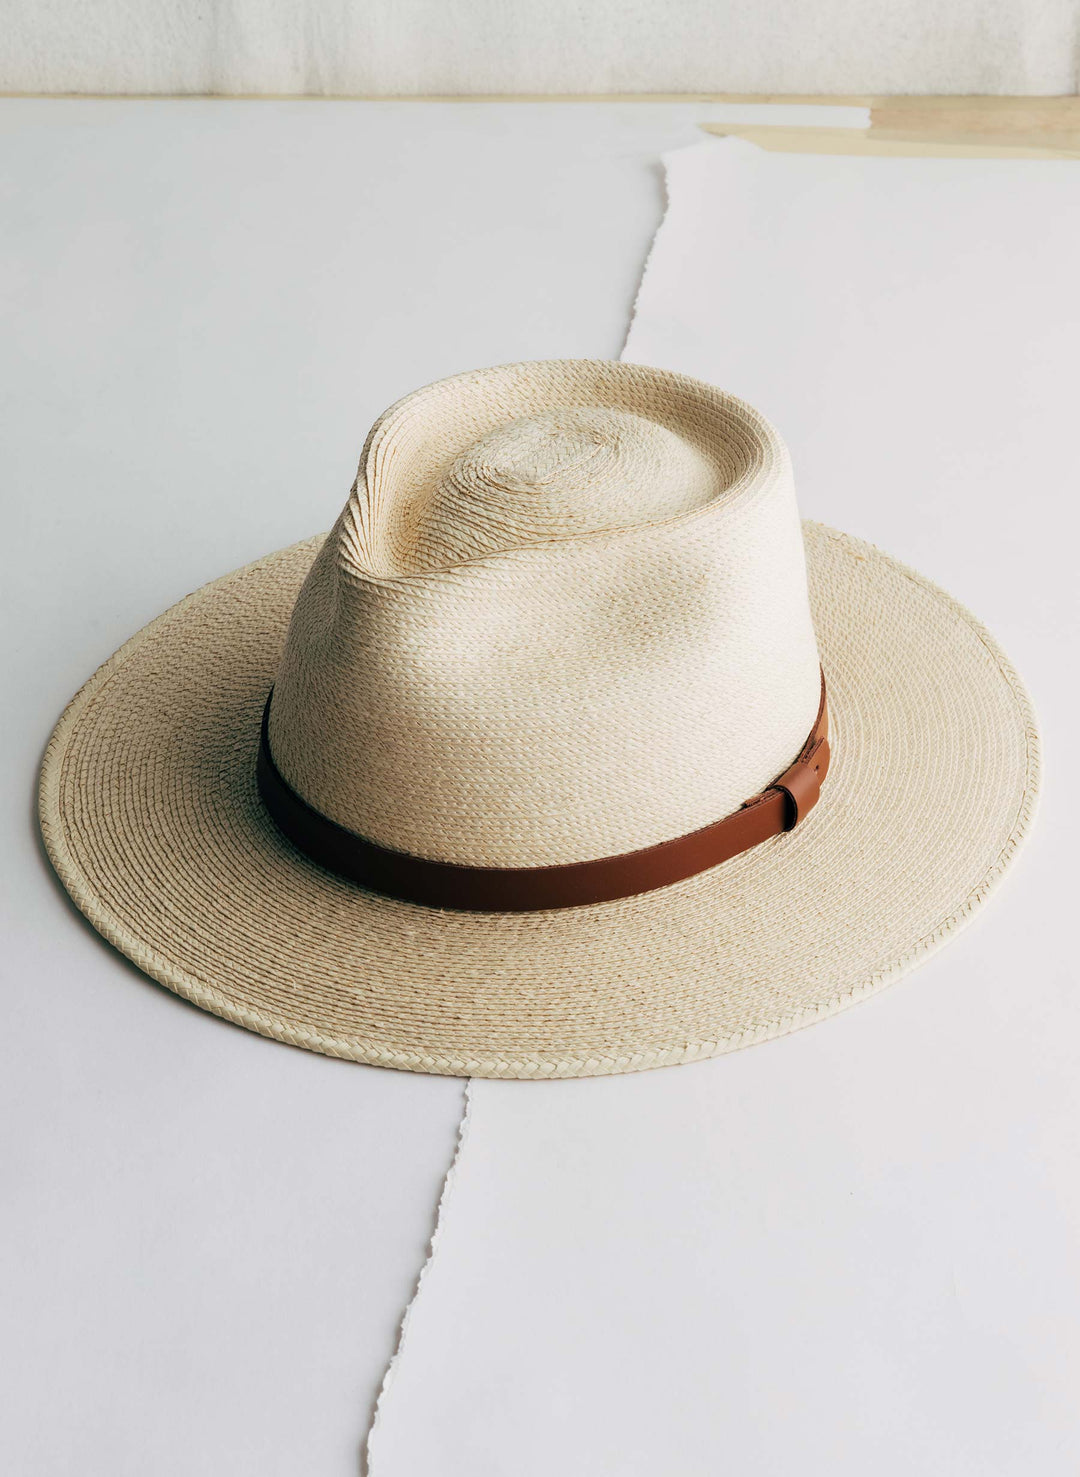 Clothing, Hat, Sun hat, Fedora, Cap, Costume hat, Beige, Composite material, Fashion accessory, Natural material